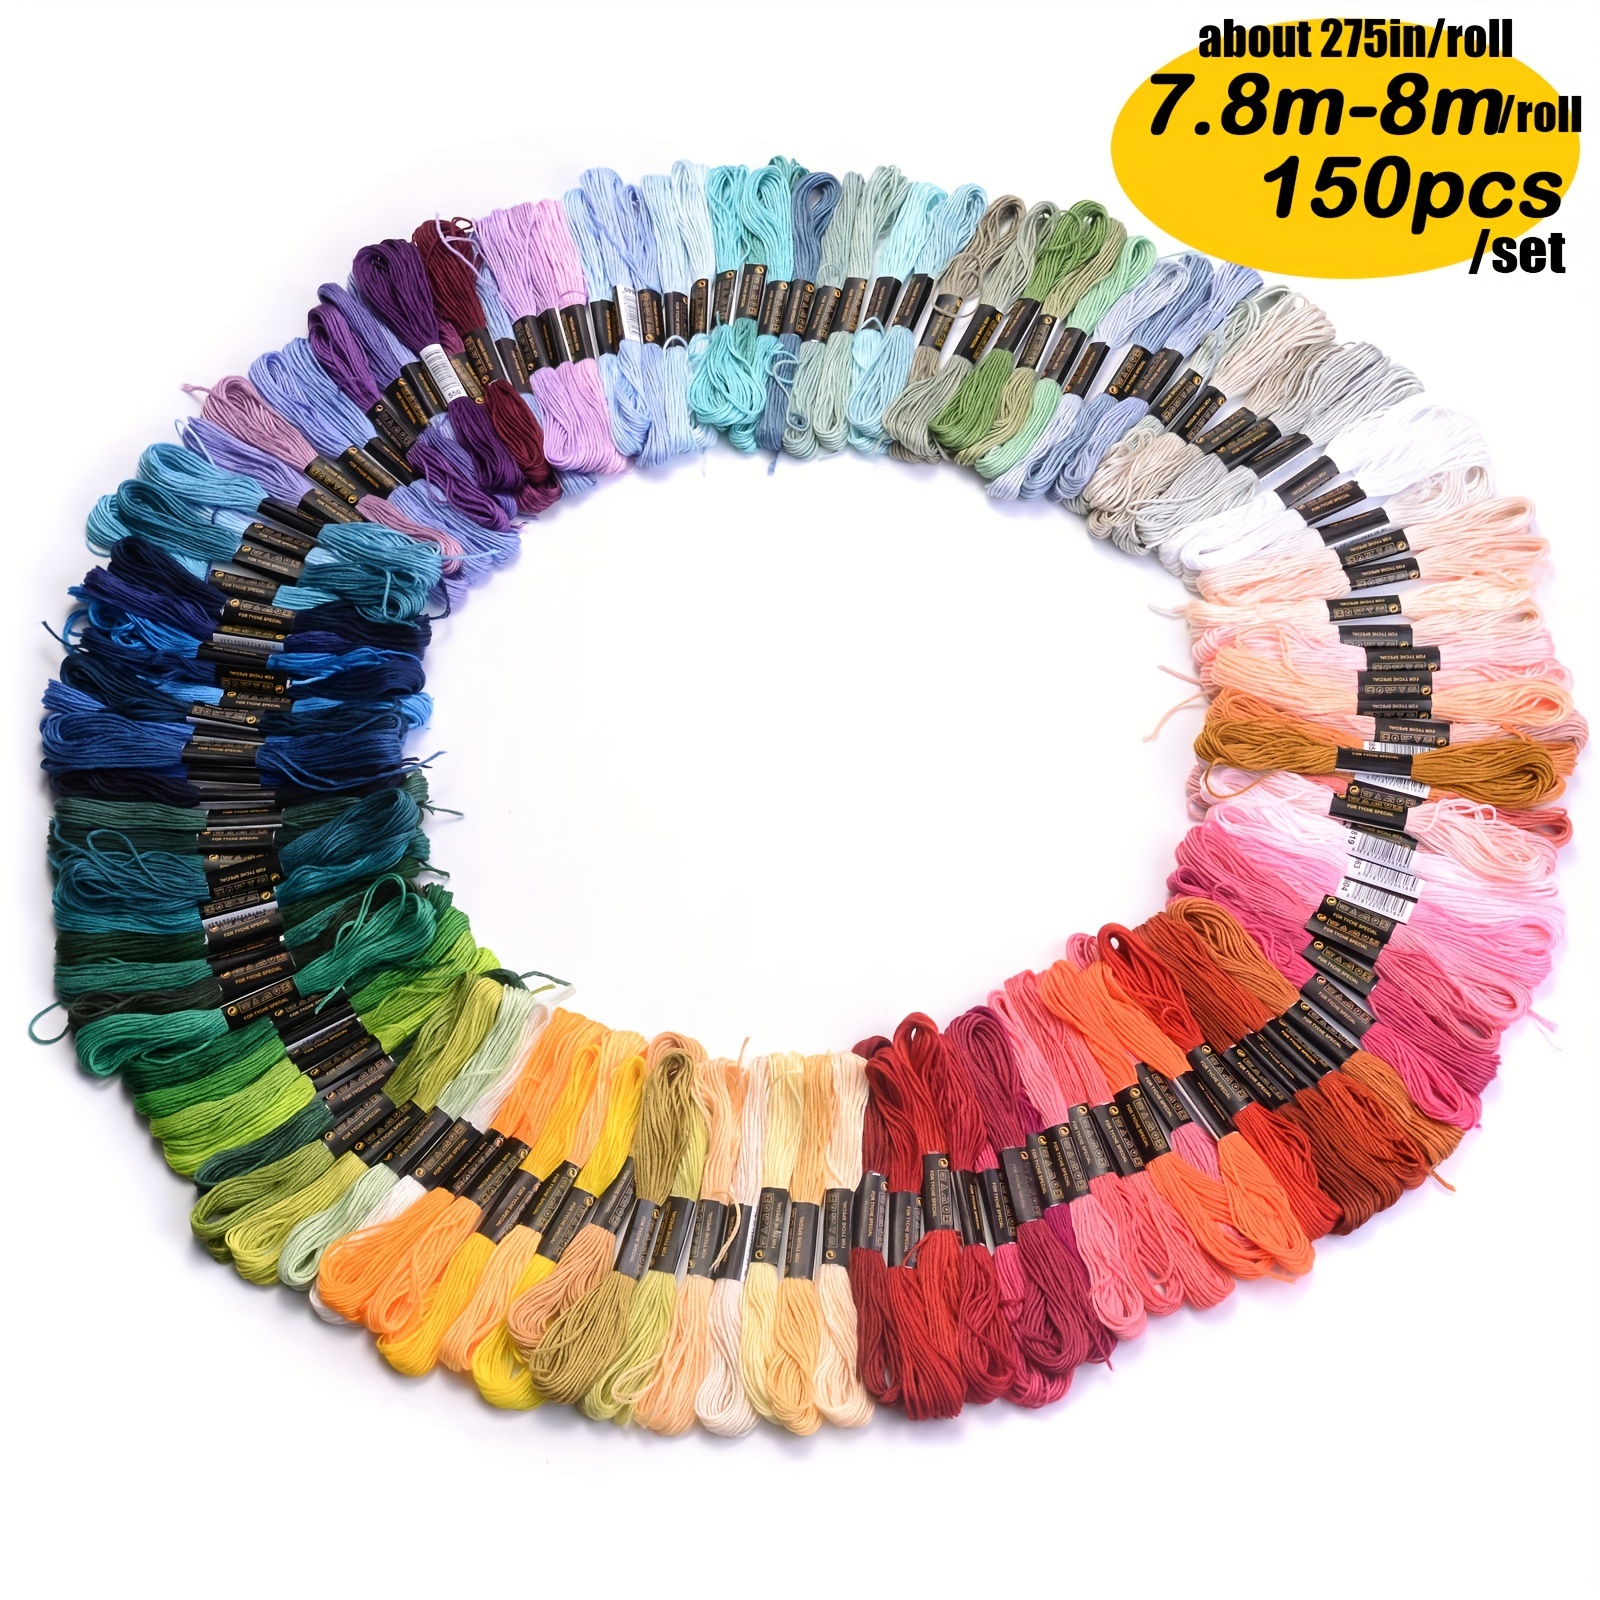  Embroidery Thread, 100 Skeins Embroidery Floss Cross Stitch  Thread Rainbow Color Friendship Bracelet String for Bracelet Making, Sewing  Crafts, Embroidery Supplies : Arts, Crafts & Sewing